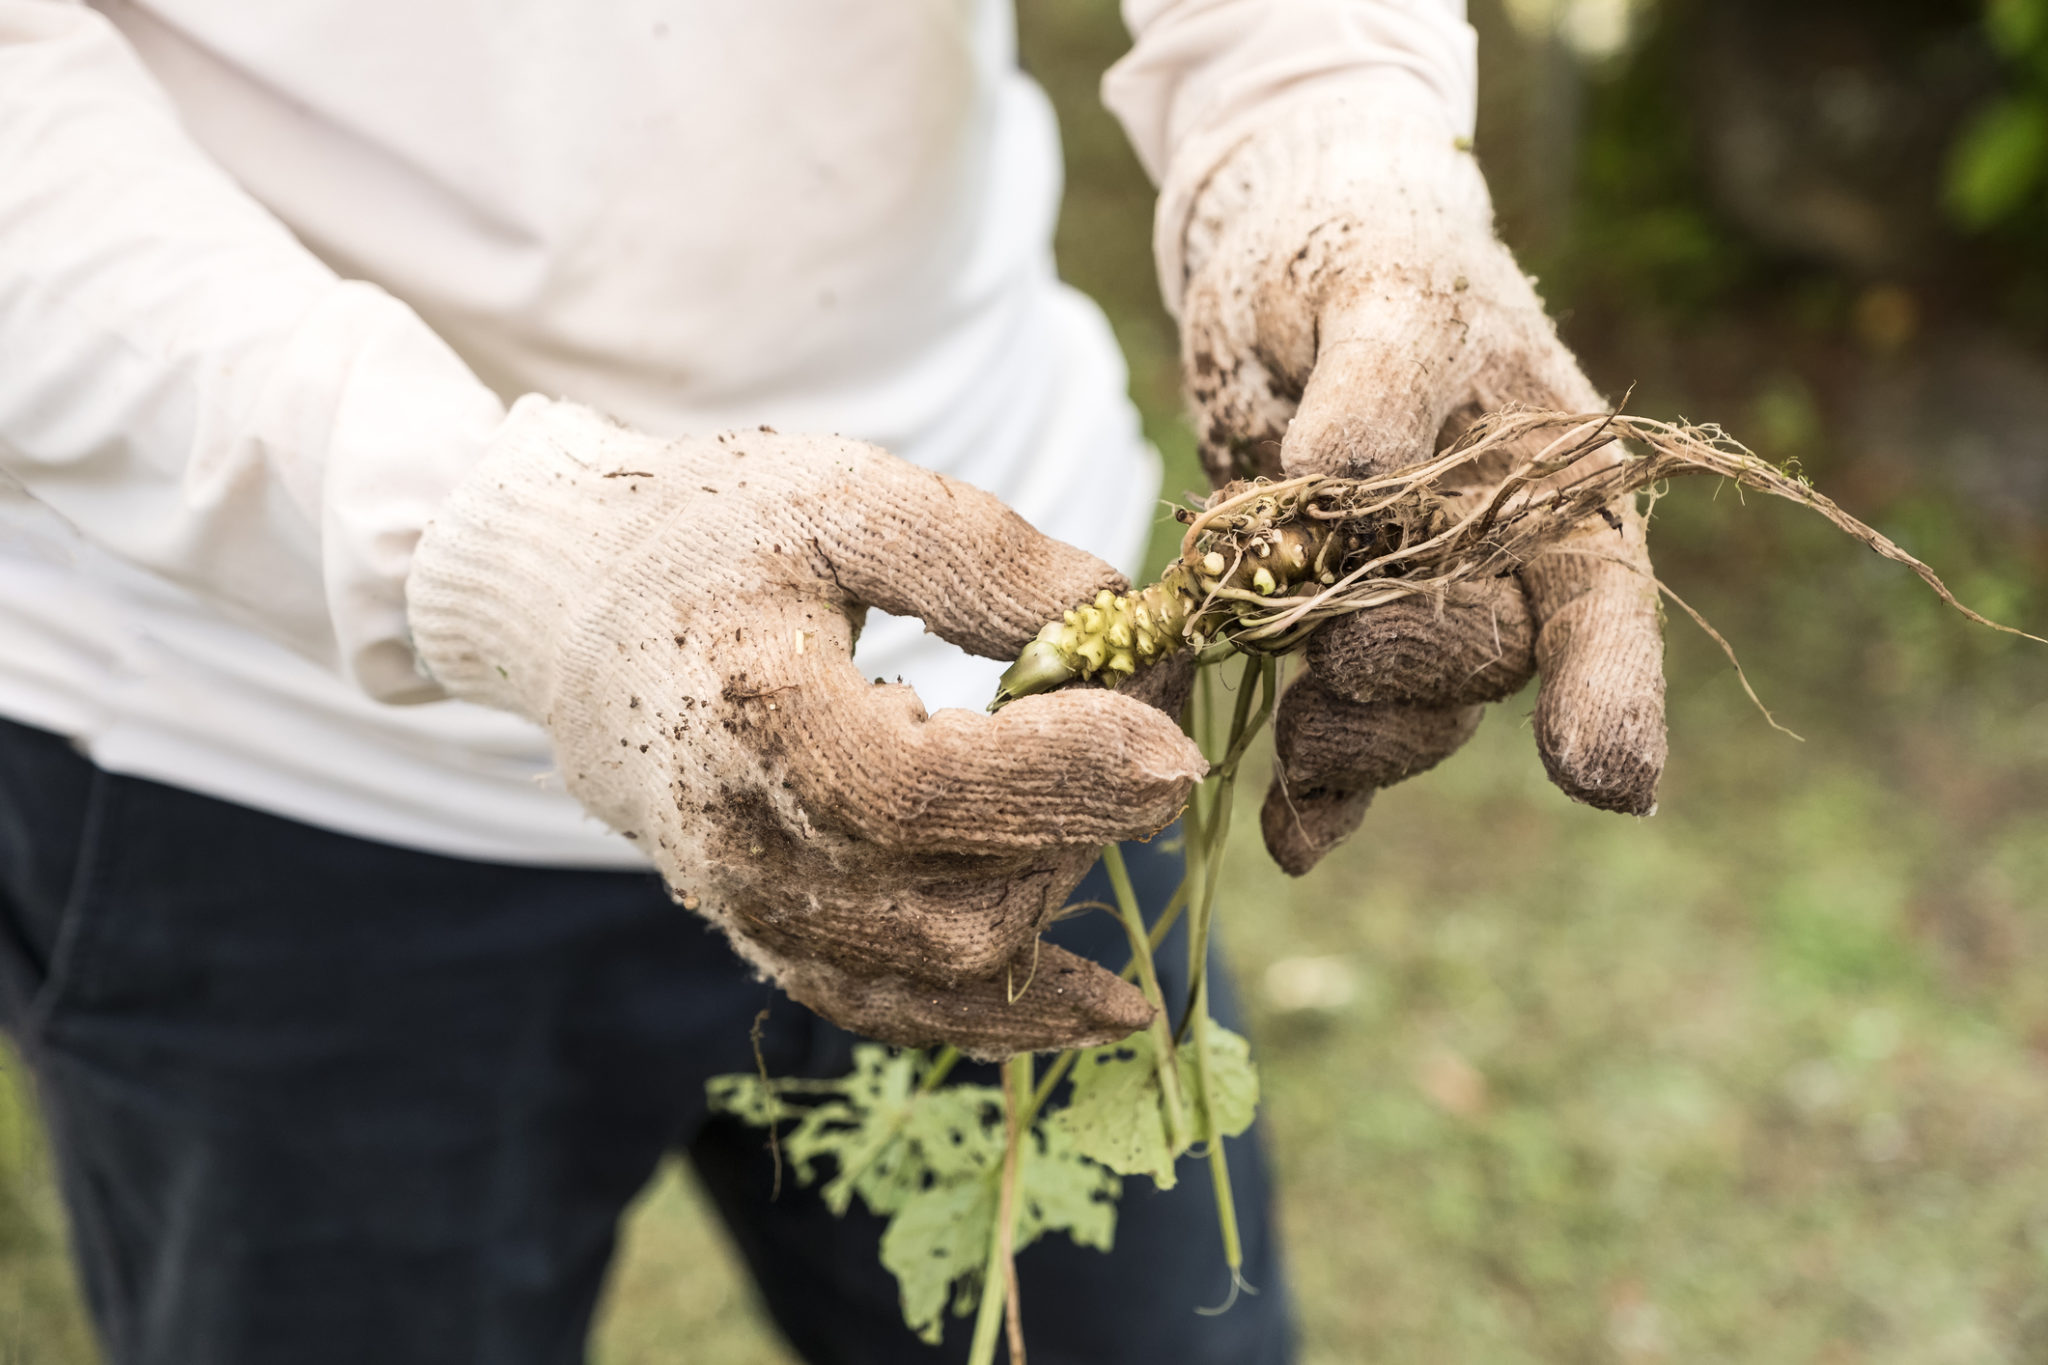 Closeup portrait of a farmer’s muddy, gloved hands holding a freshly harvested wasabi plant